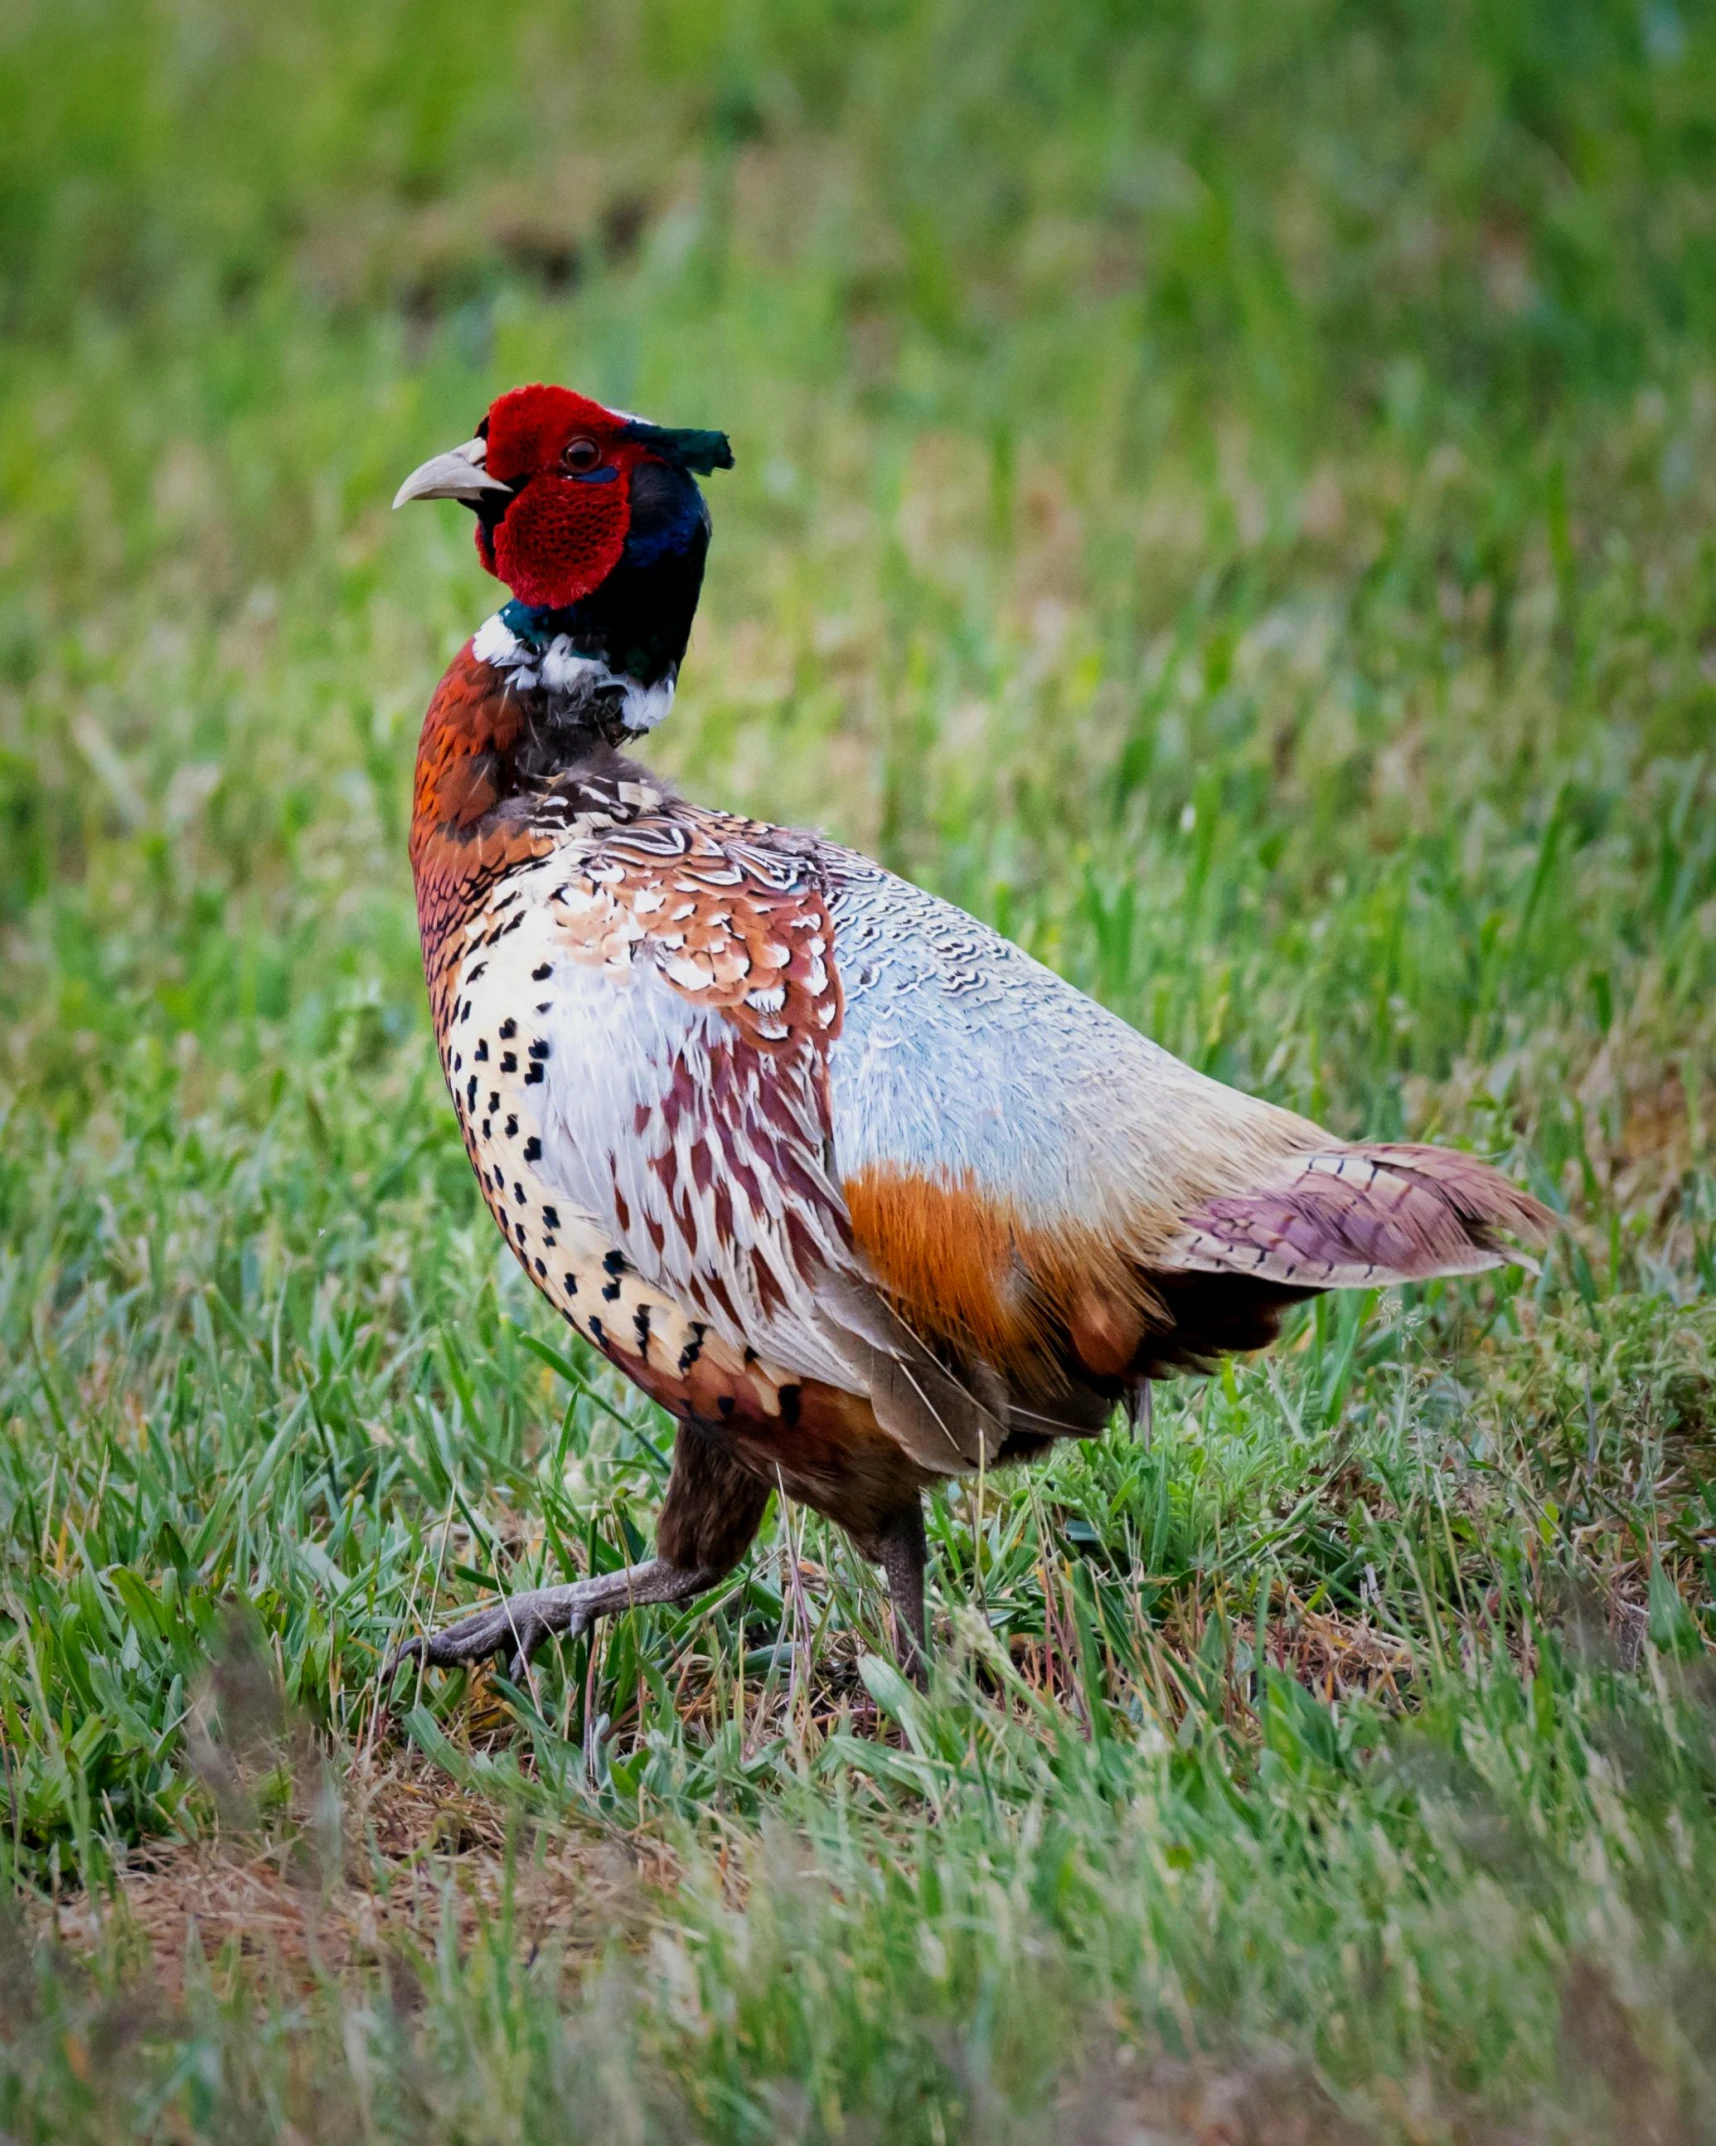 a bird with brown, red and blue feathers walking in the grass